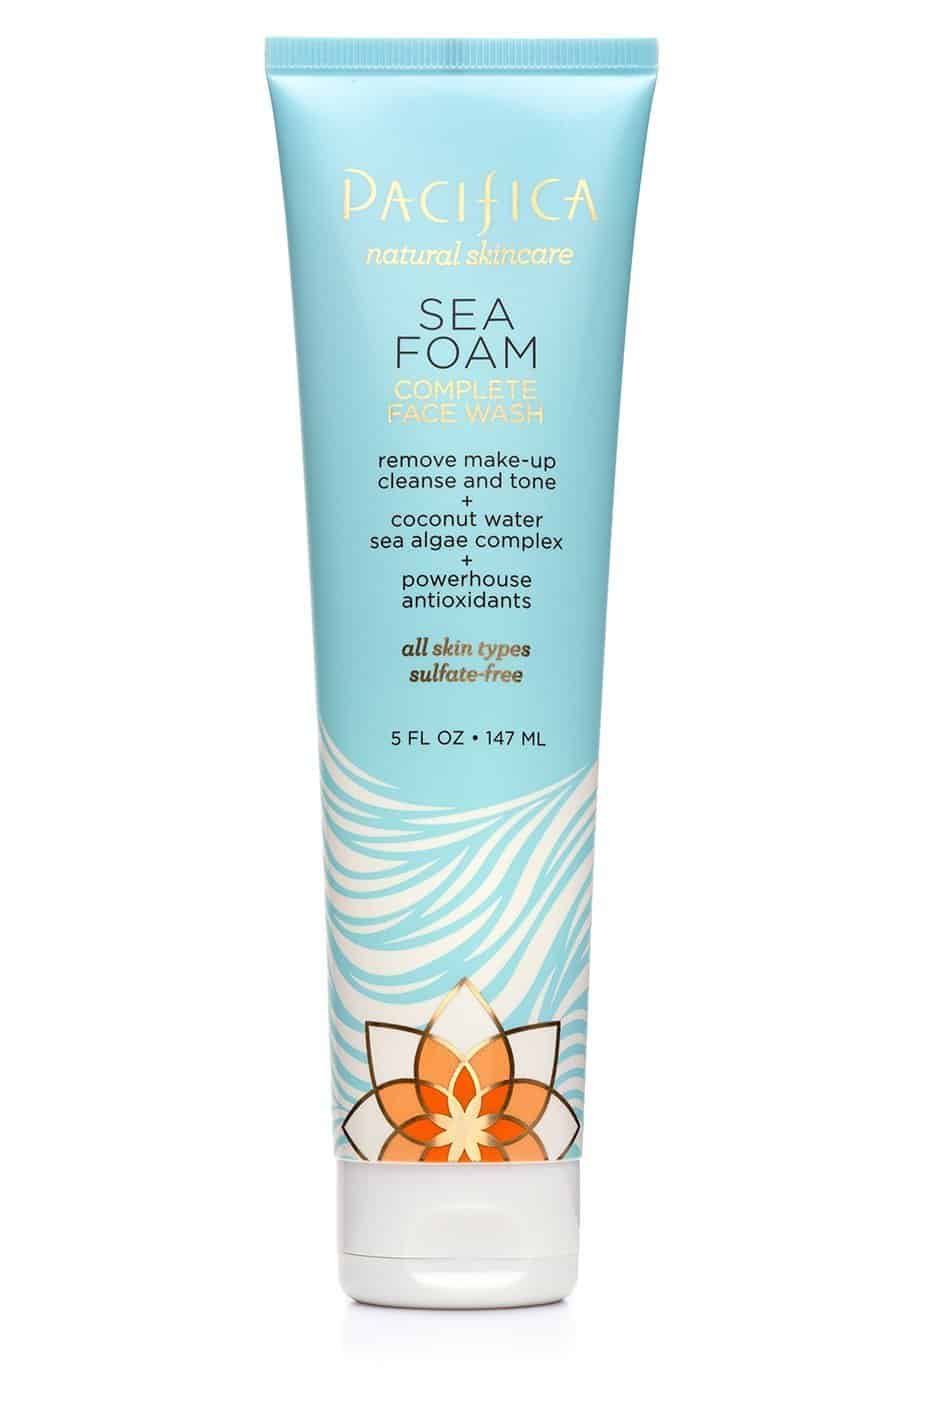 Pacifica Sea Foam Complete Face Wash for all skin types | multipurpose facial cleanser